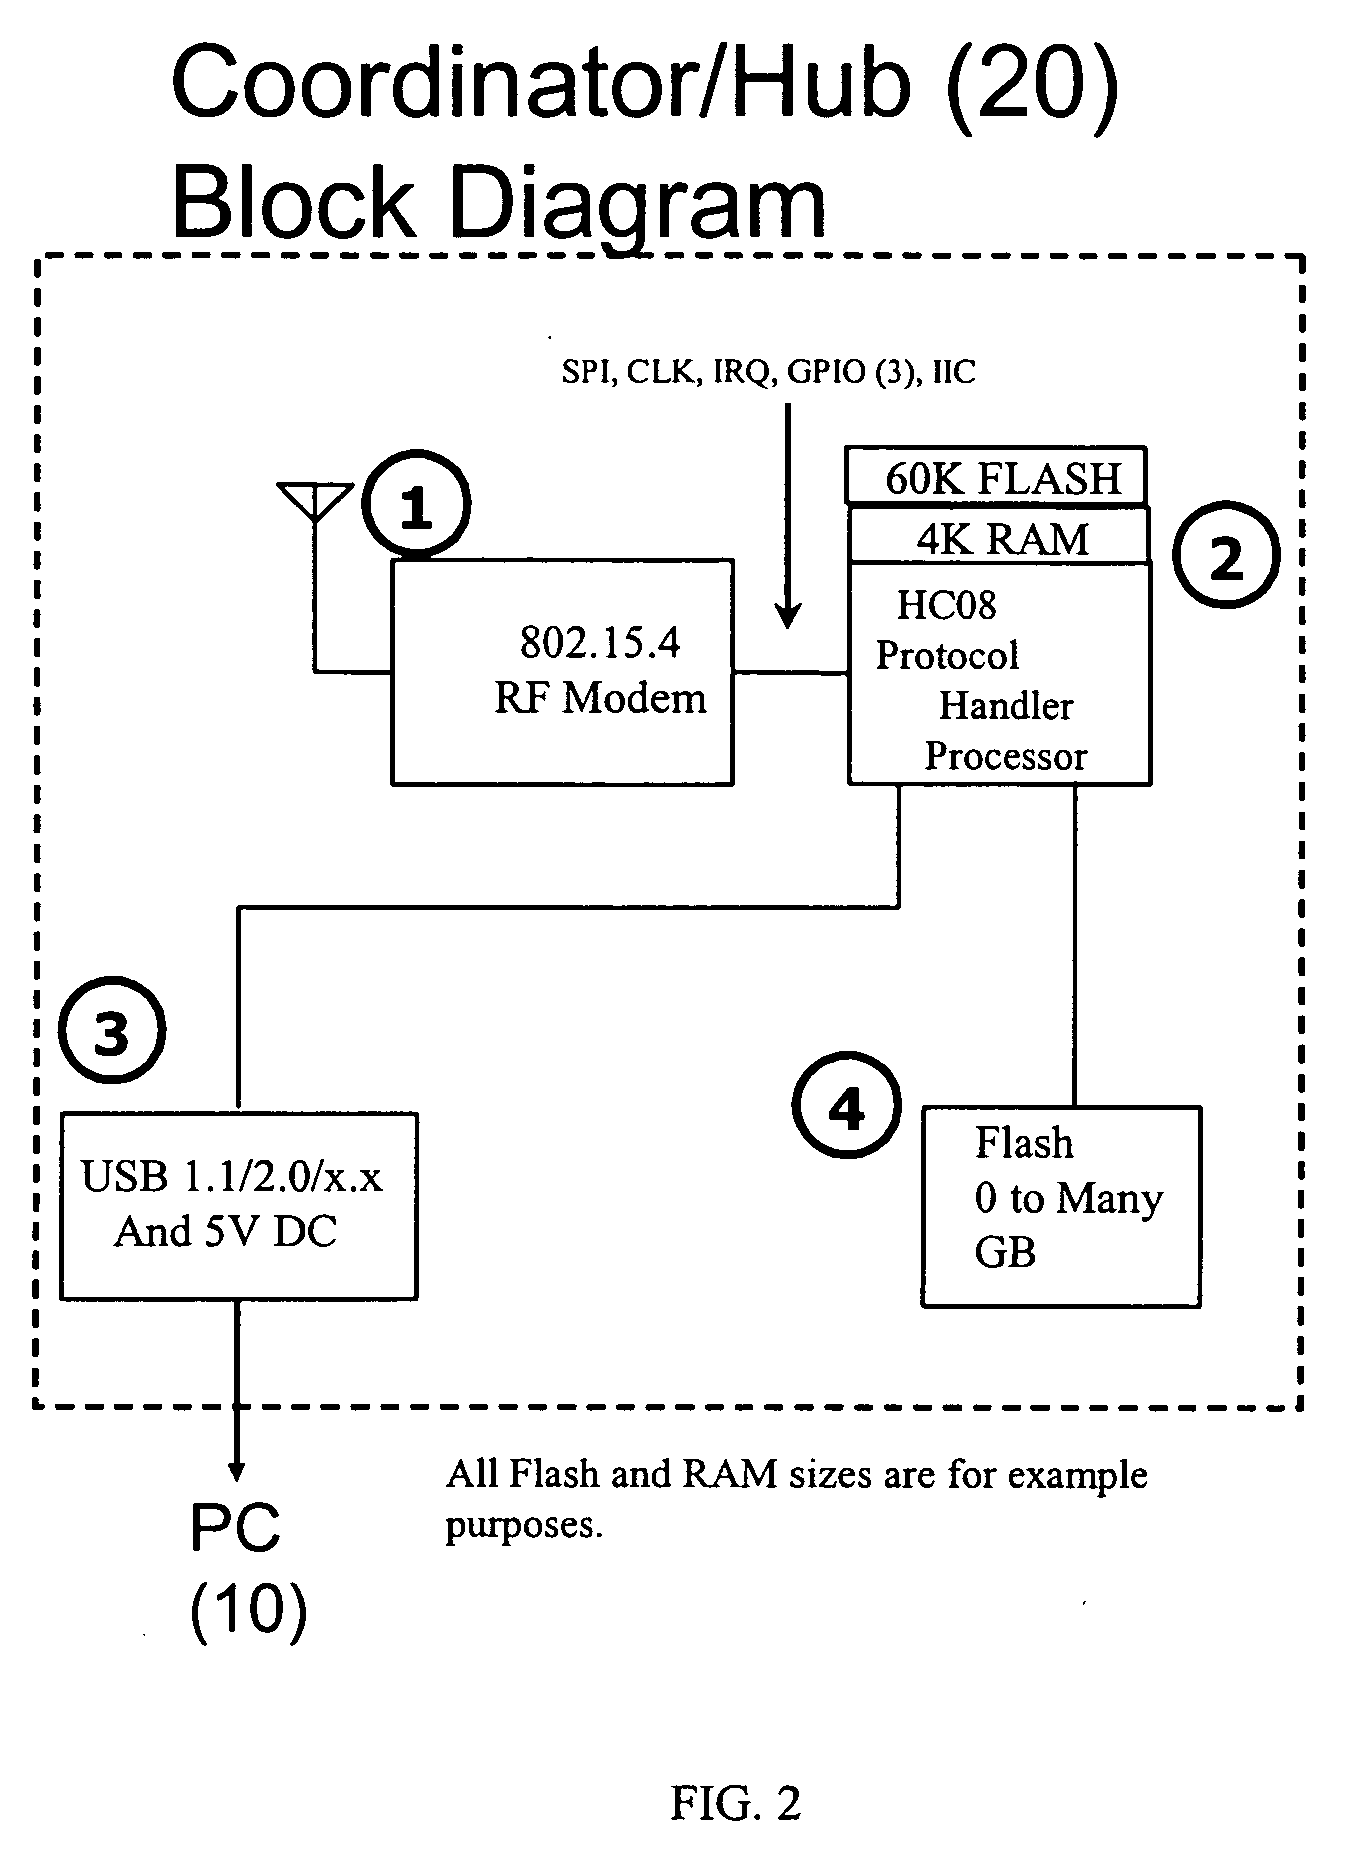 System and method for communicating over an 802.15.4 network